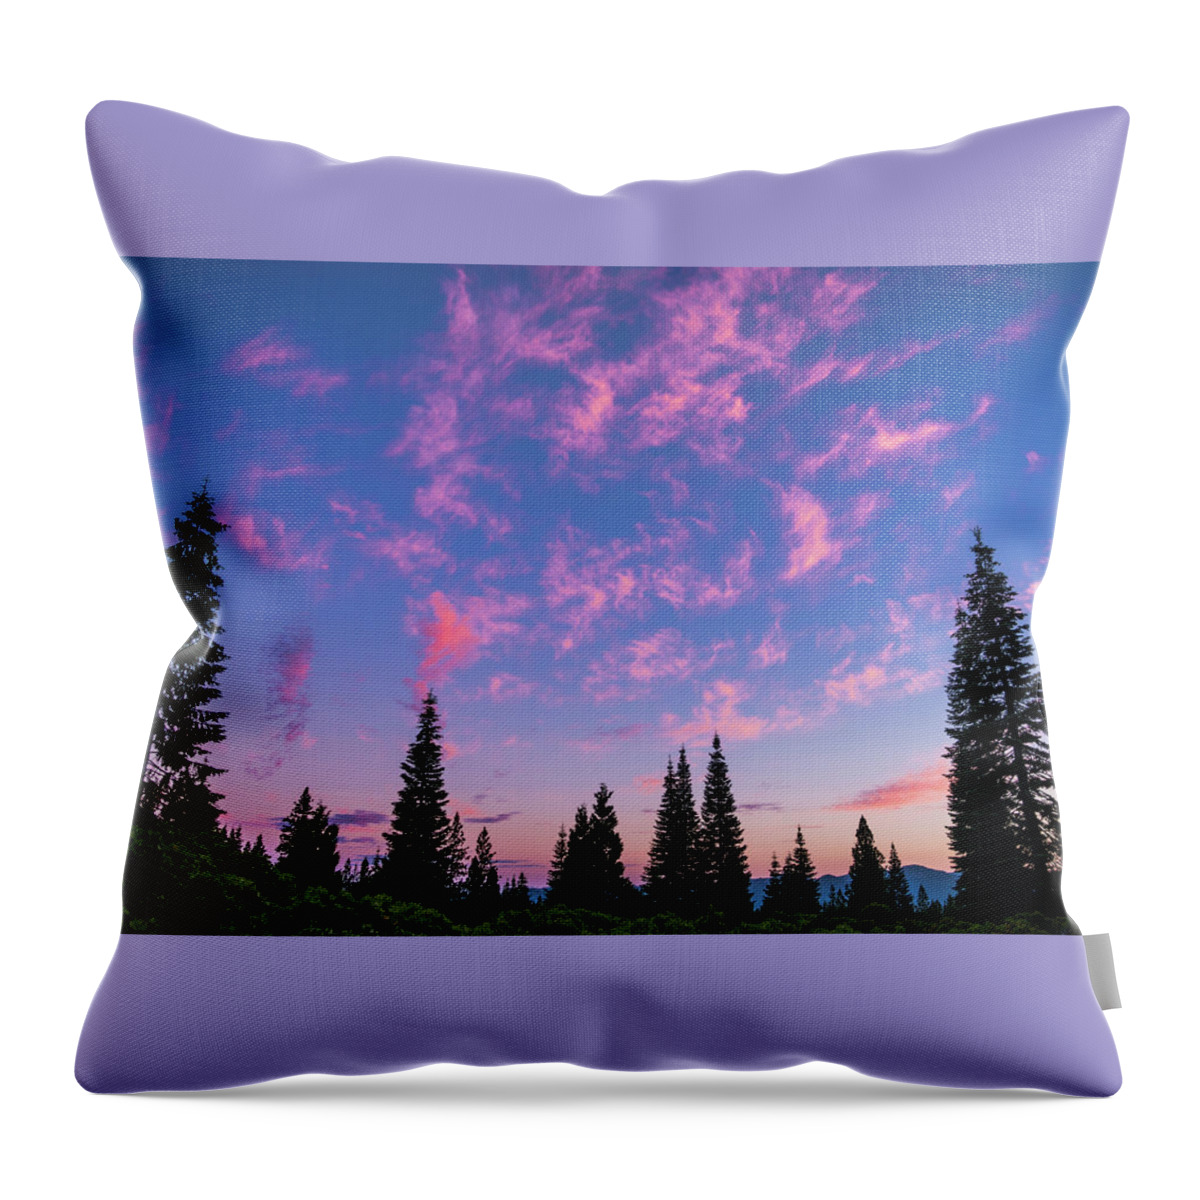 California Throw Pillow featuring the photograph Pink Cloud Sunset Mount Shasta California by Lawrence S Richardson Jr